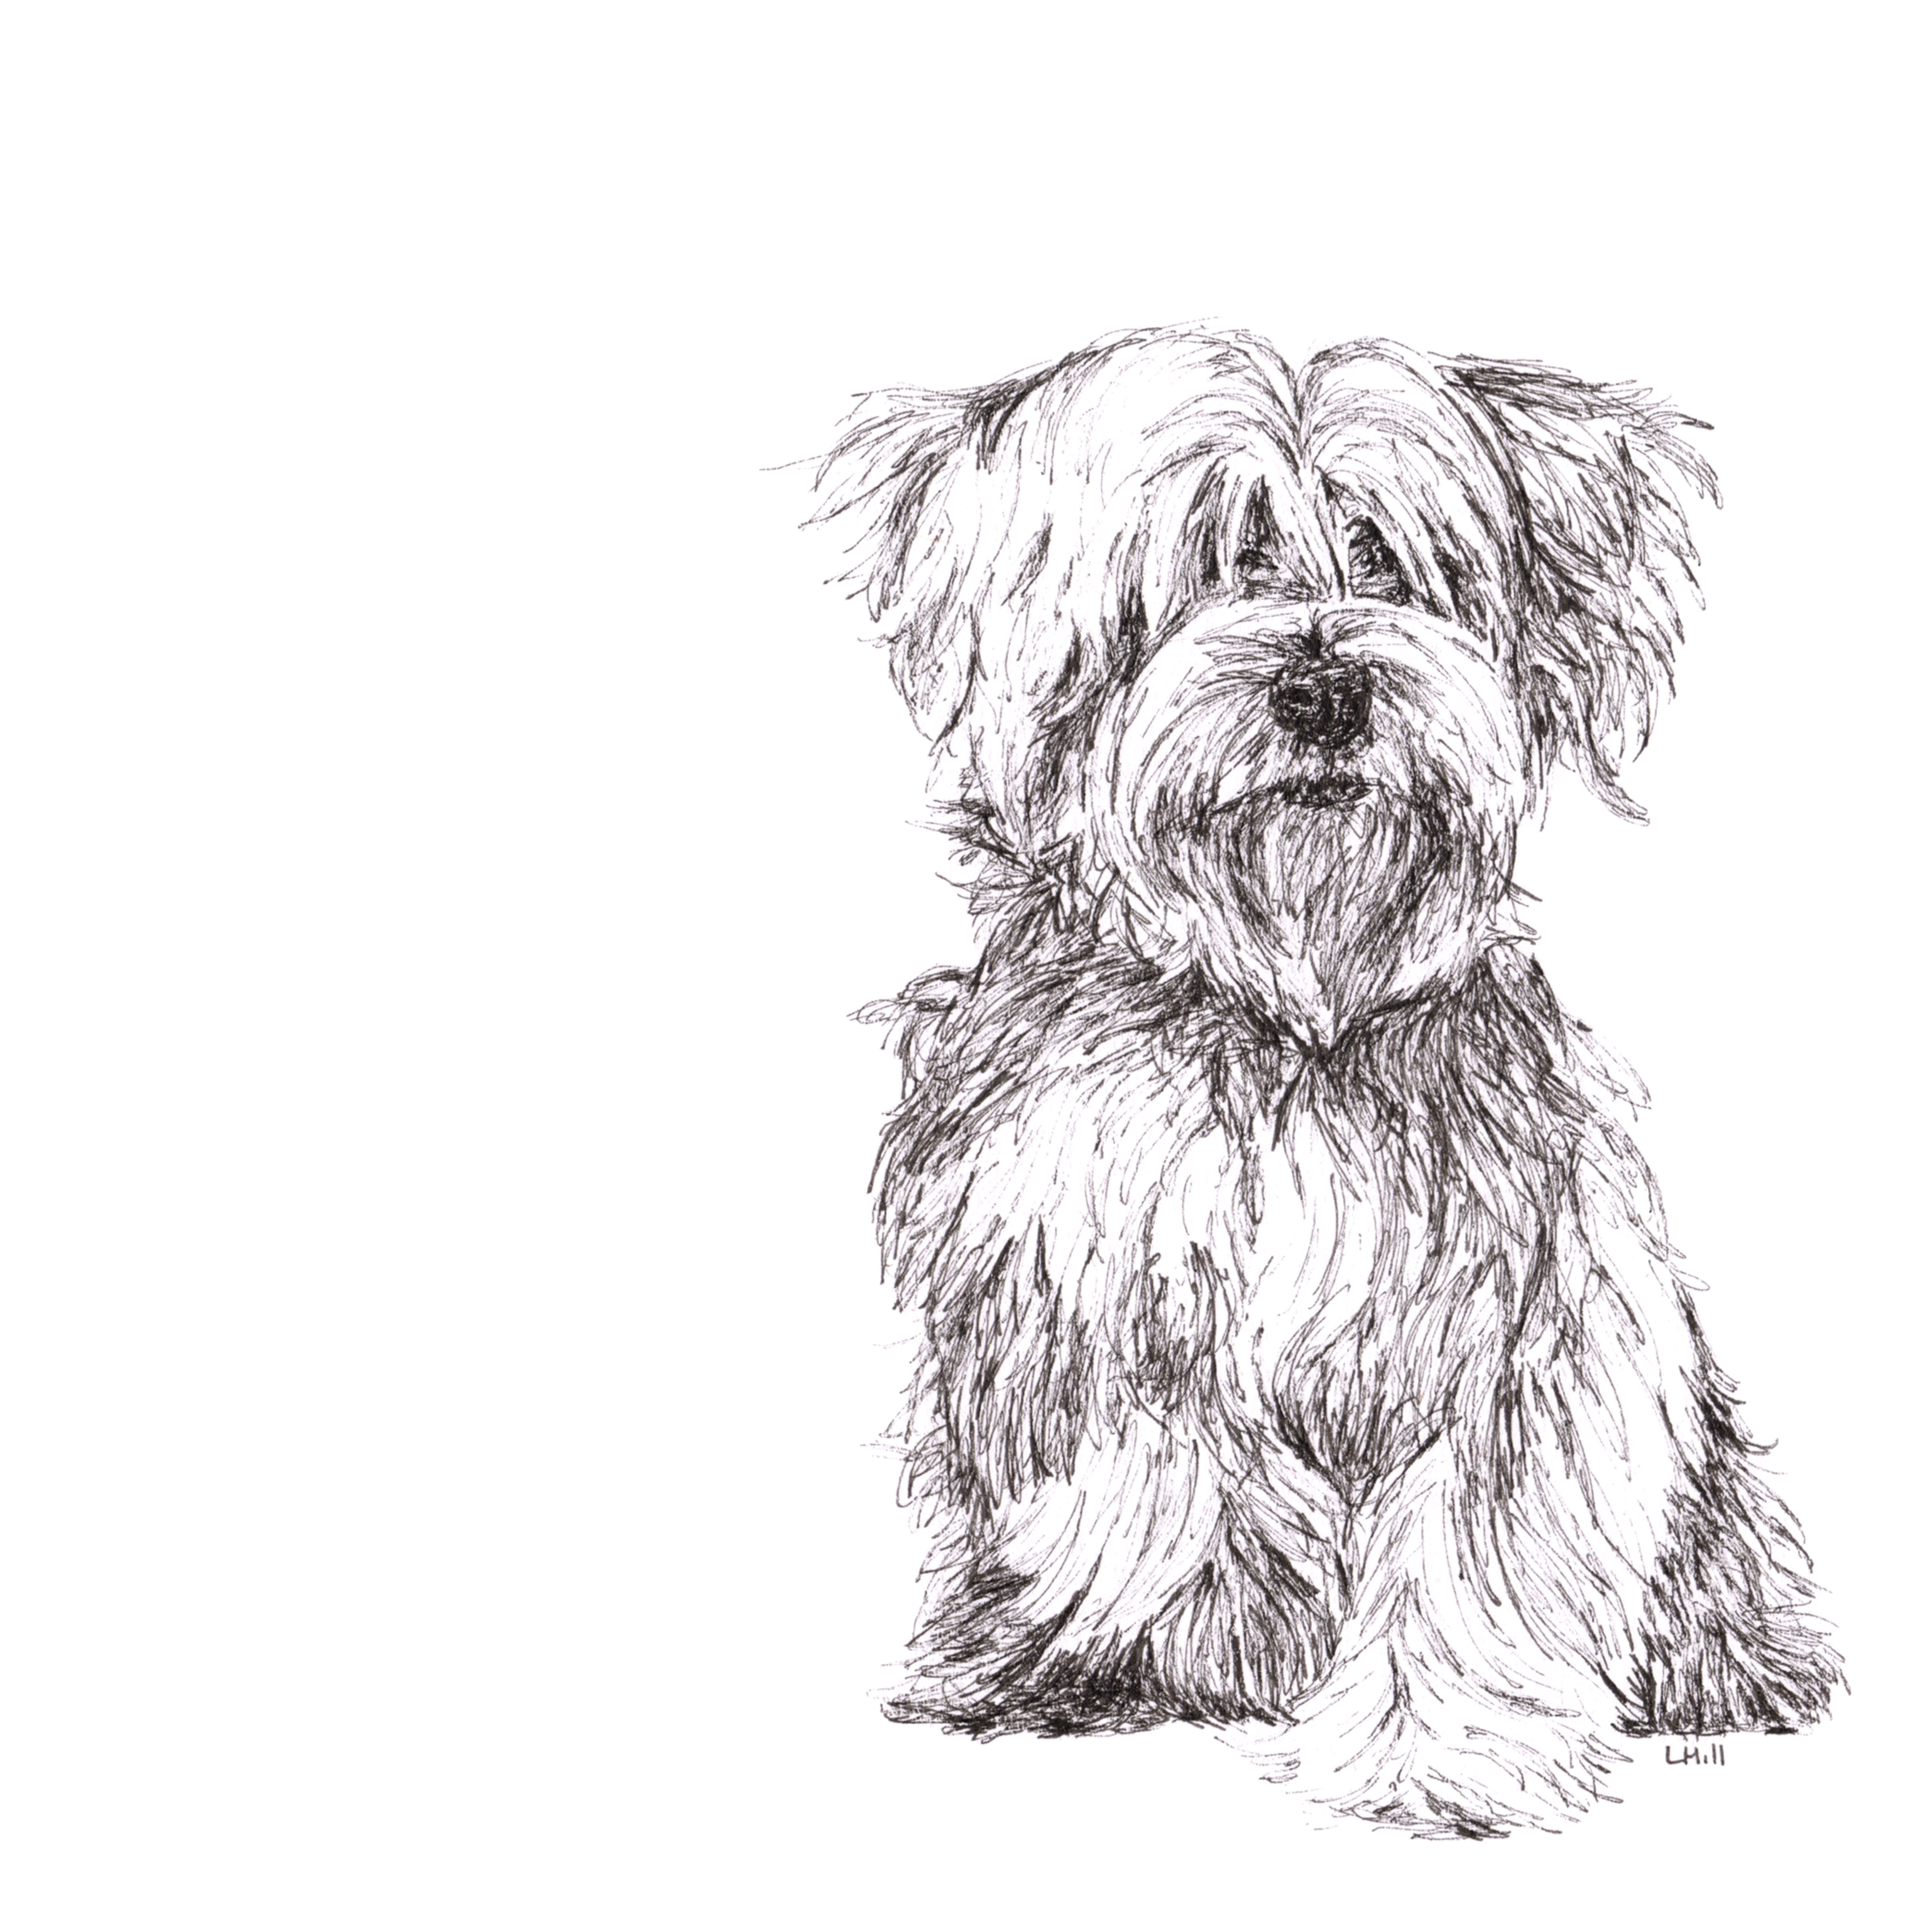 Maltese Terrier pen and ink illustration by Louisa Hill